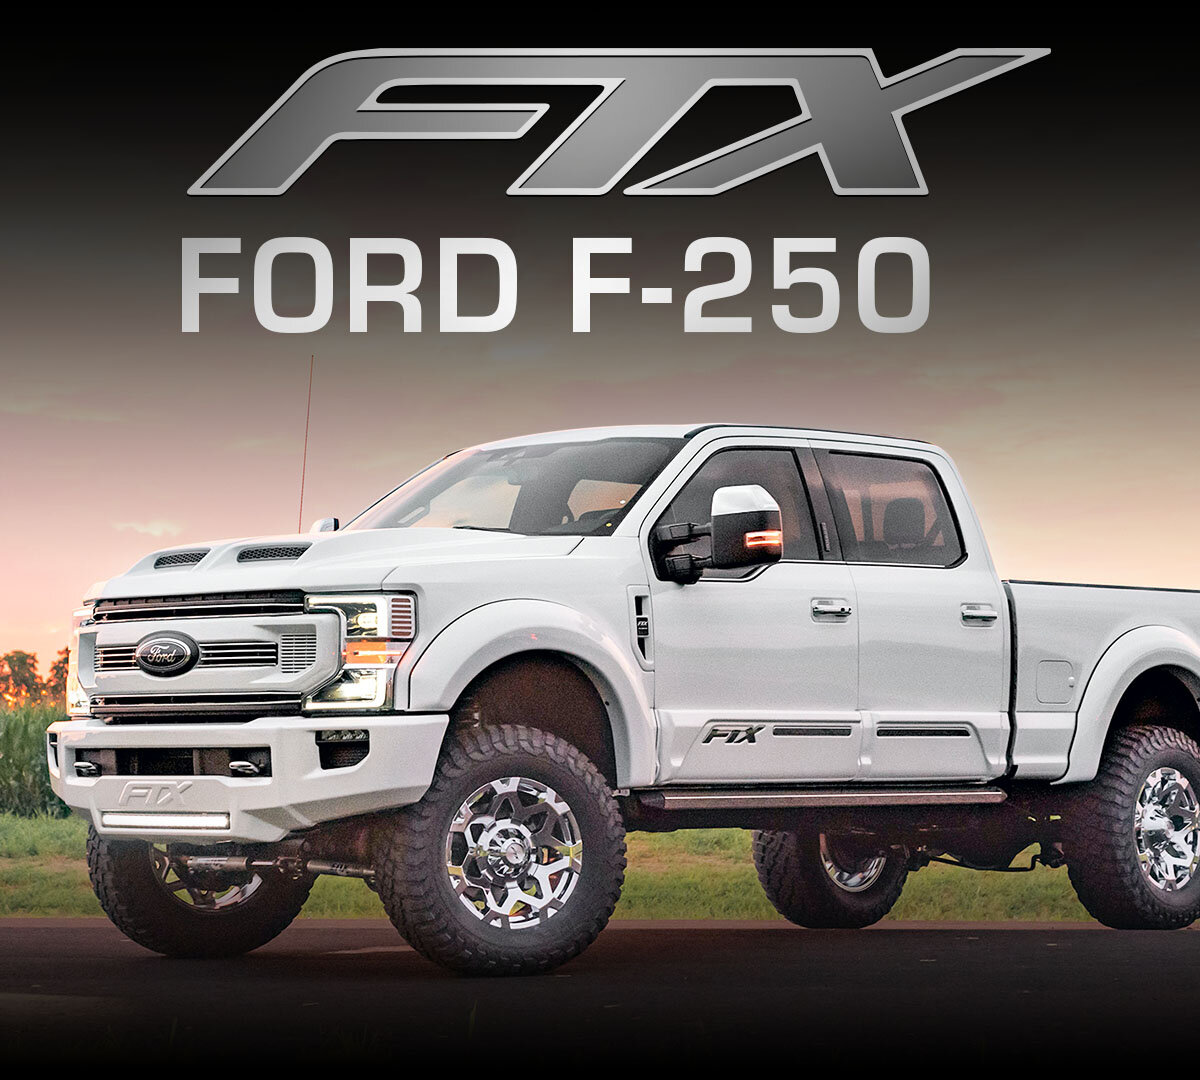 Ford F250 FTX